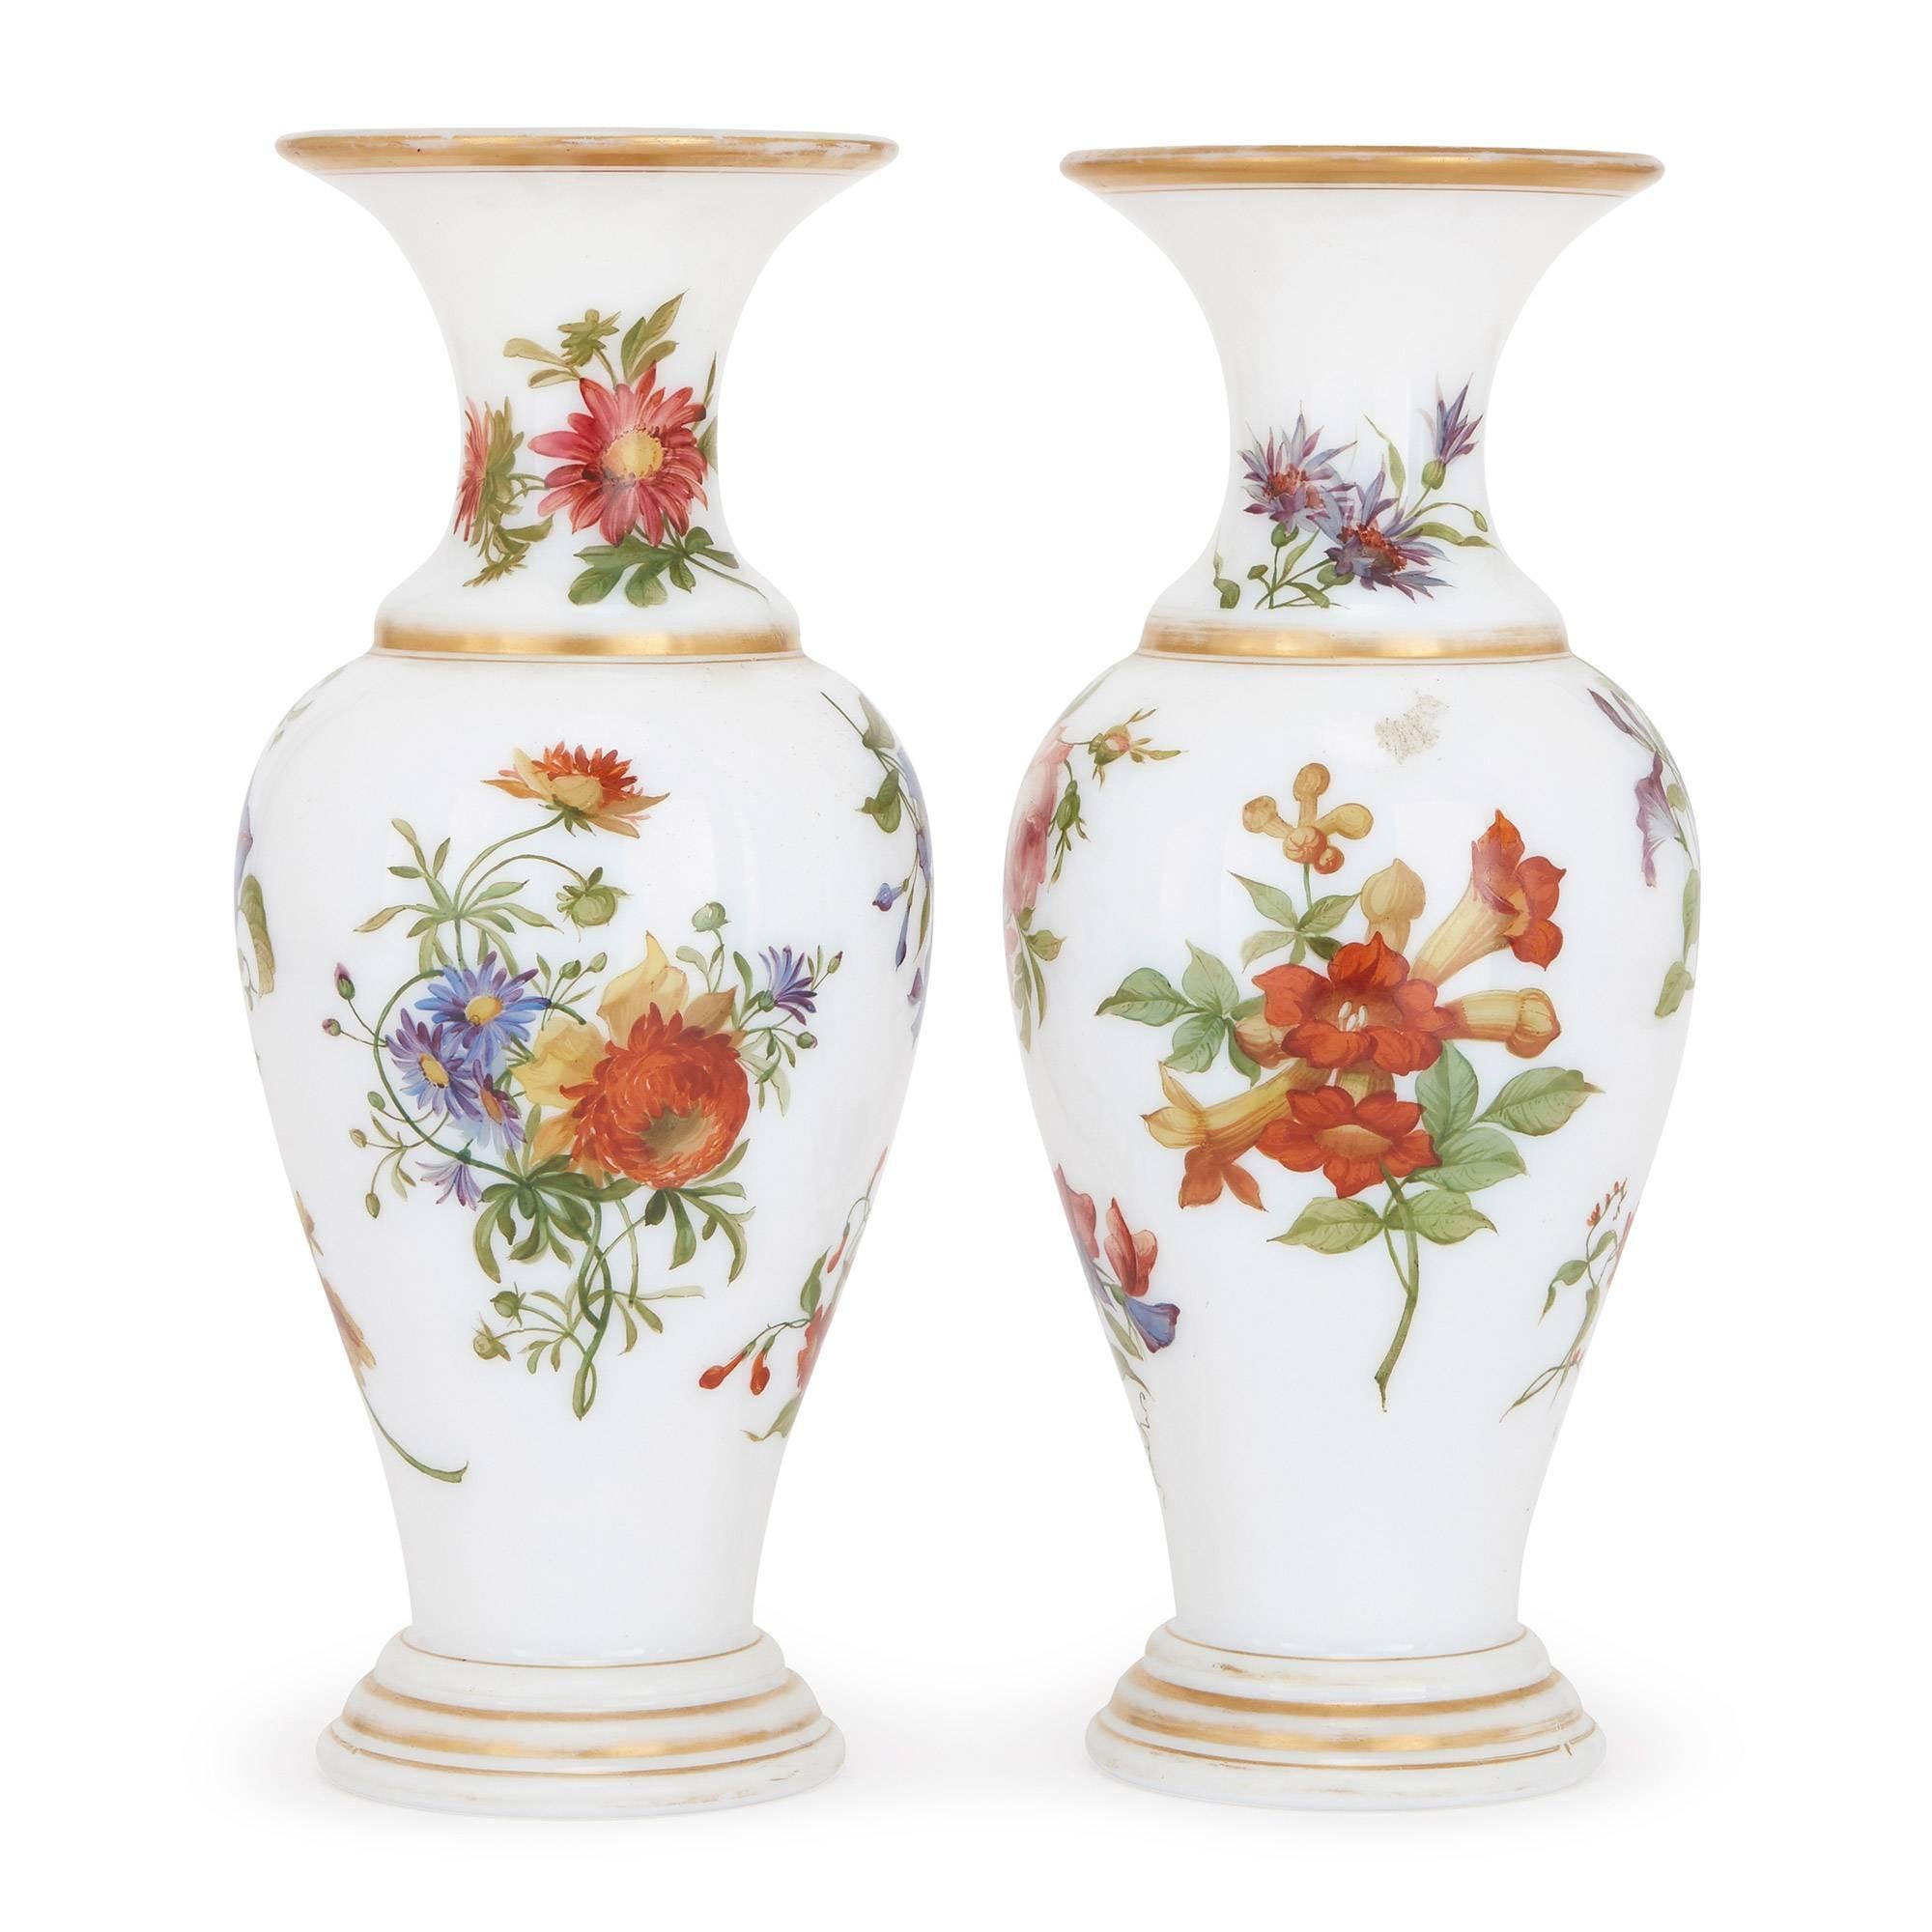 Belle Époque Pair of Floral Opaline Glass Vases Attributed to Baccarat